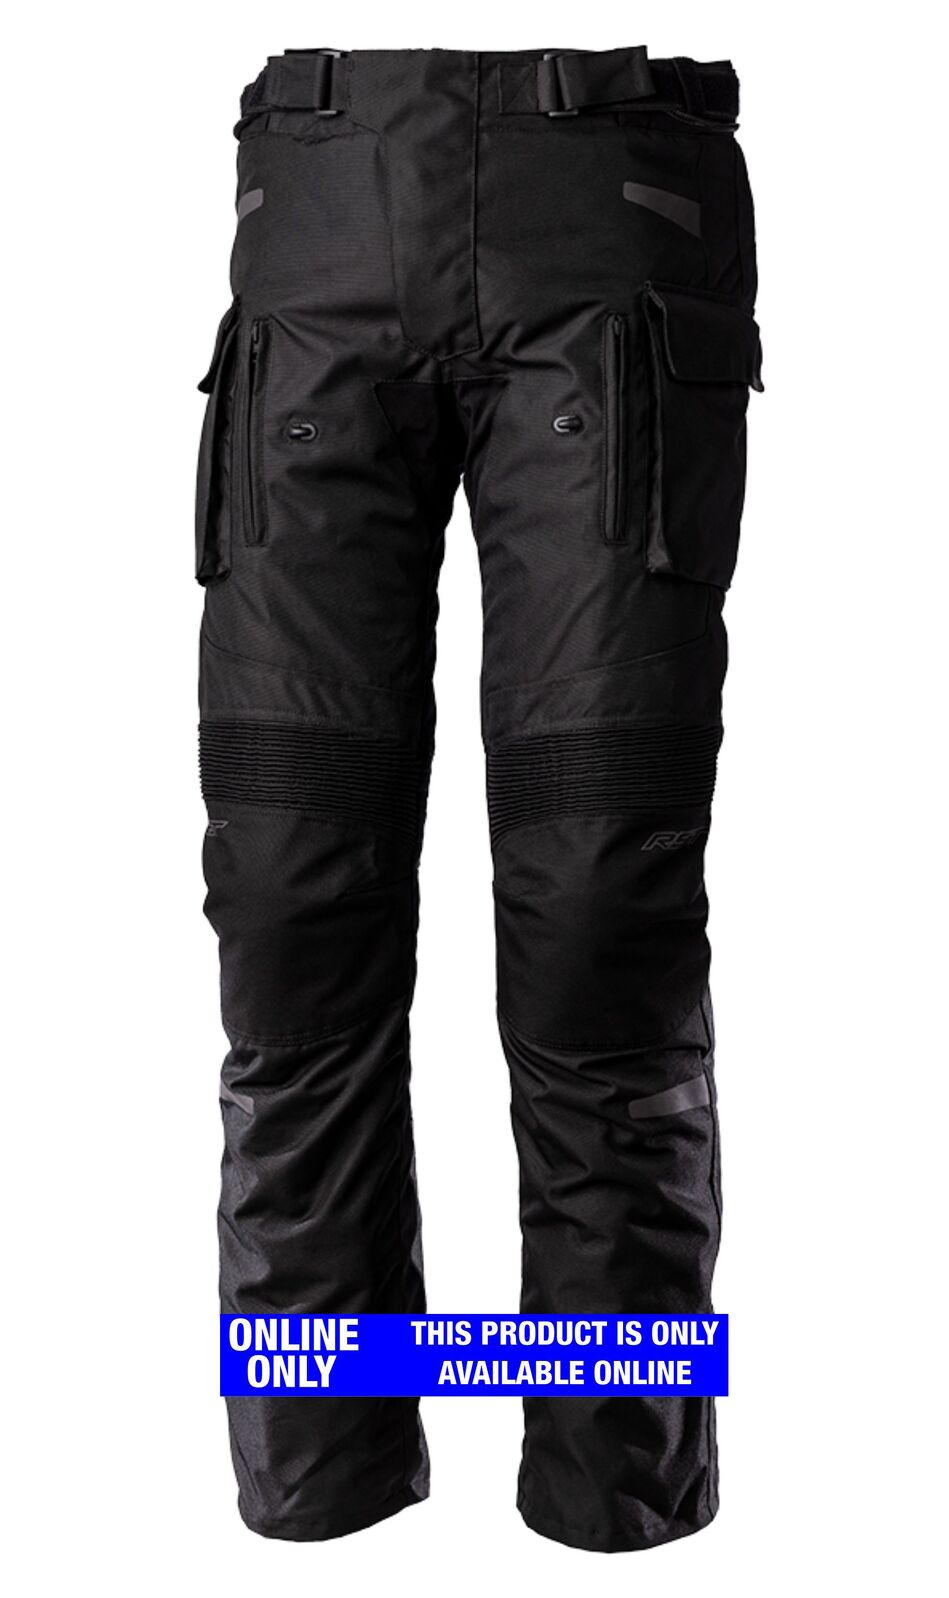 Amazon.com: YXYECEIPENO Detachable Armor Motorcycle Pants Men's Motorcycle  Riding Jeans Upgrade Extended Knee Pads Suitable for Equestrian (Color :  Black, Size : XX-Large) : כלי רכב